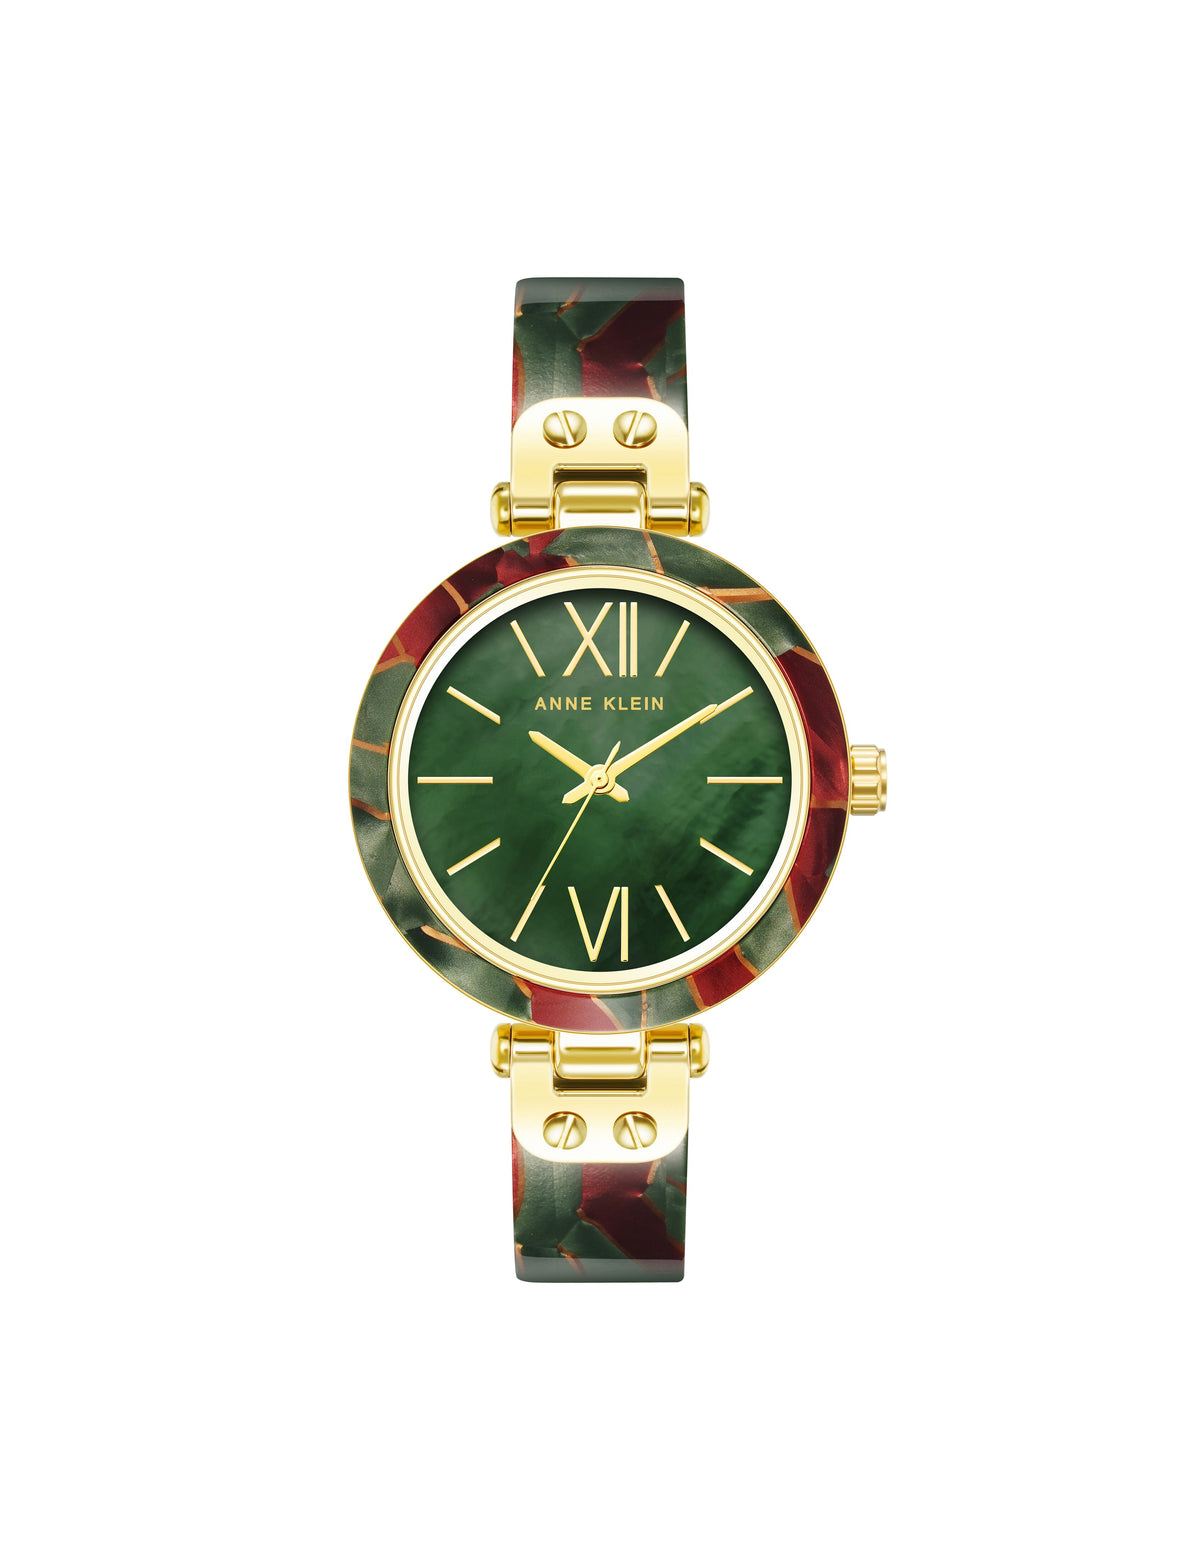 Anne Klein Gold-Tone/ Green/ Burgundy Multi-Color Resin Watch